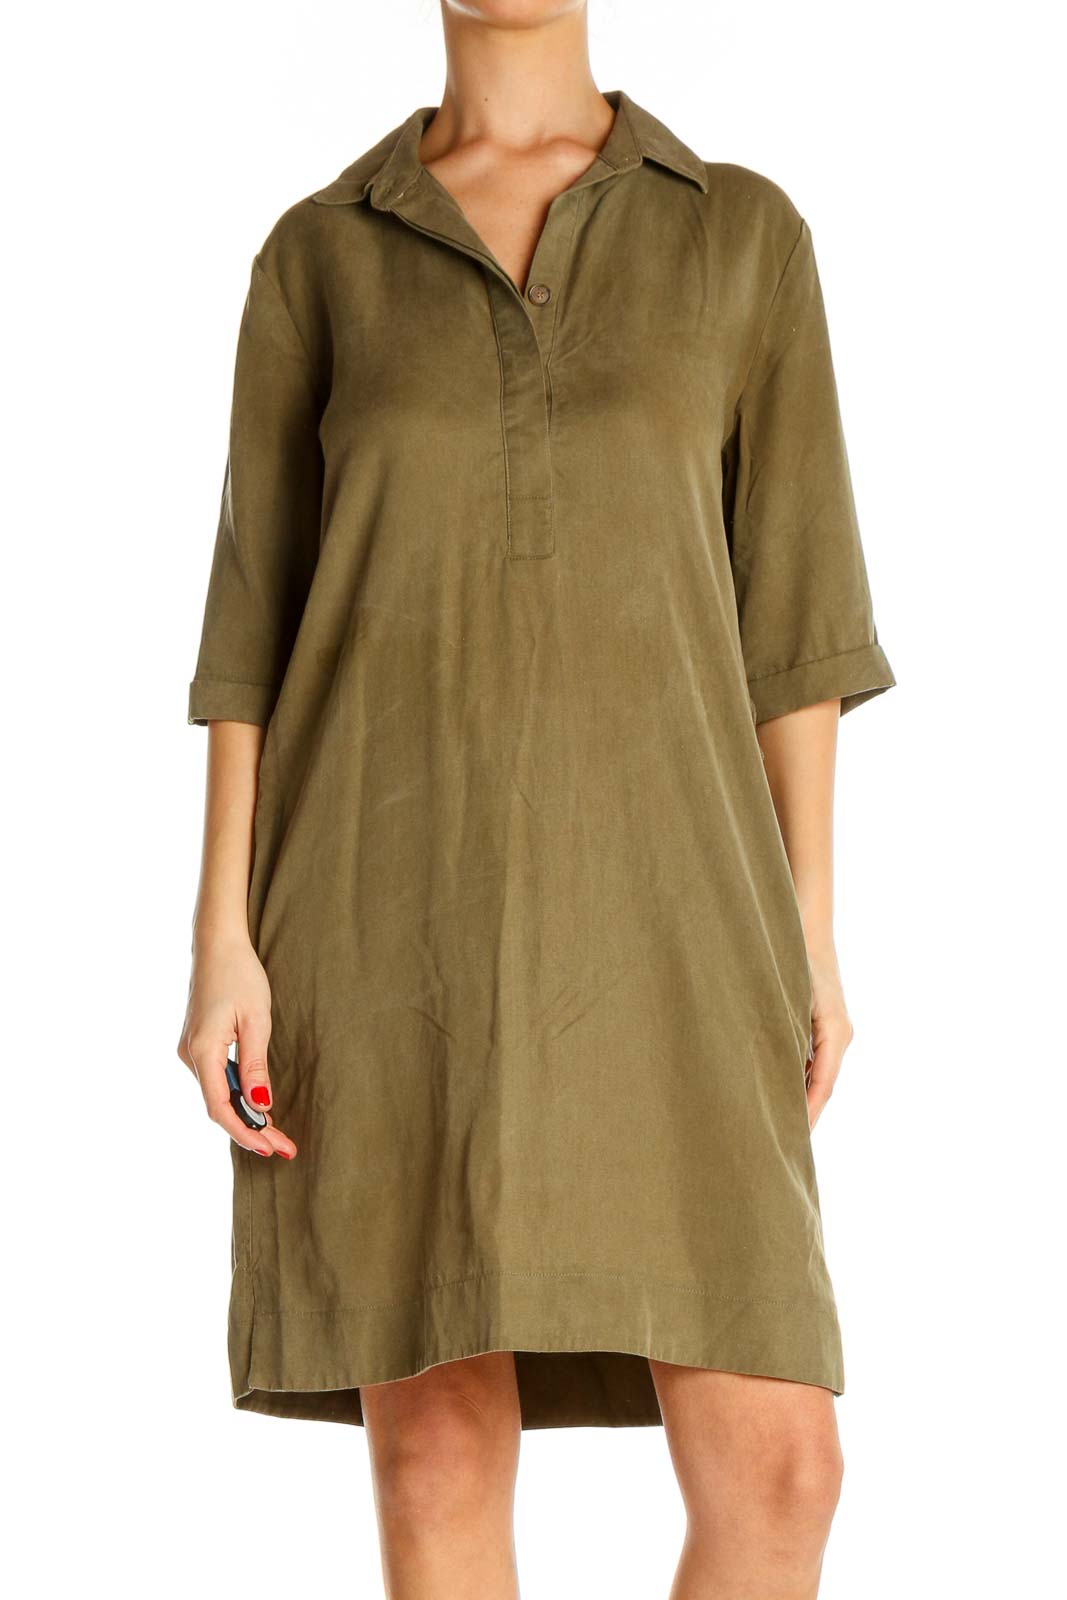 Brown Solid Classic Shift Dress Front